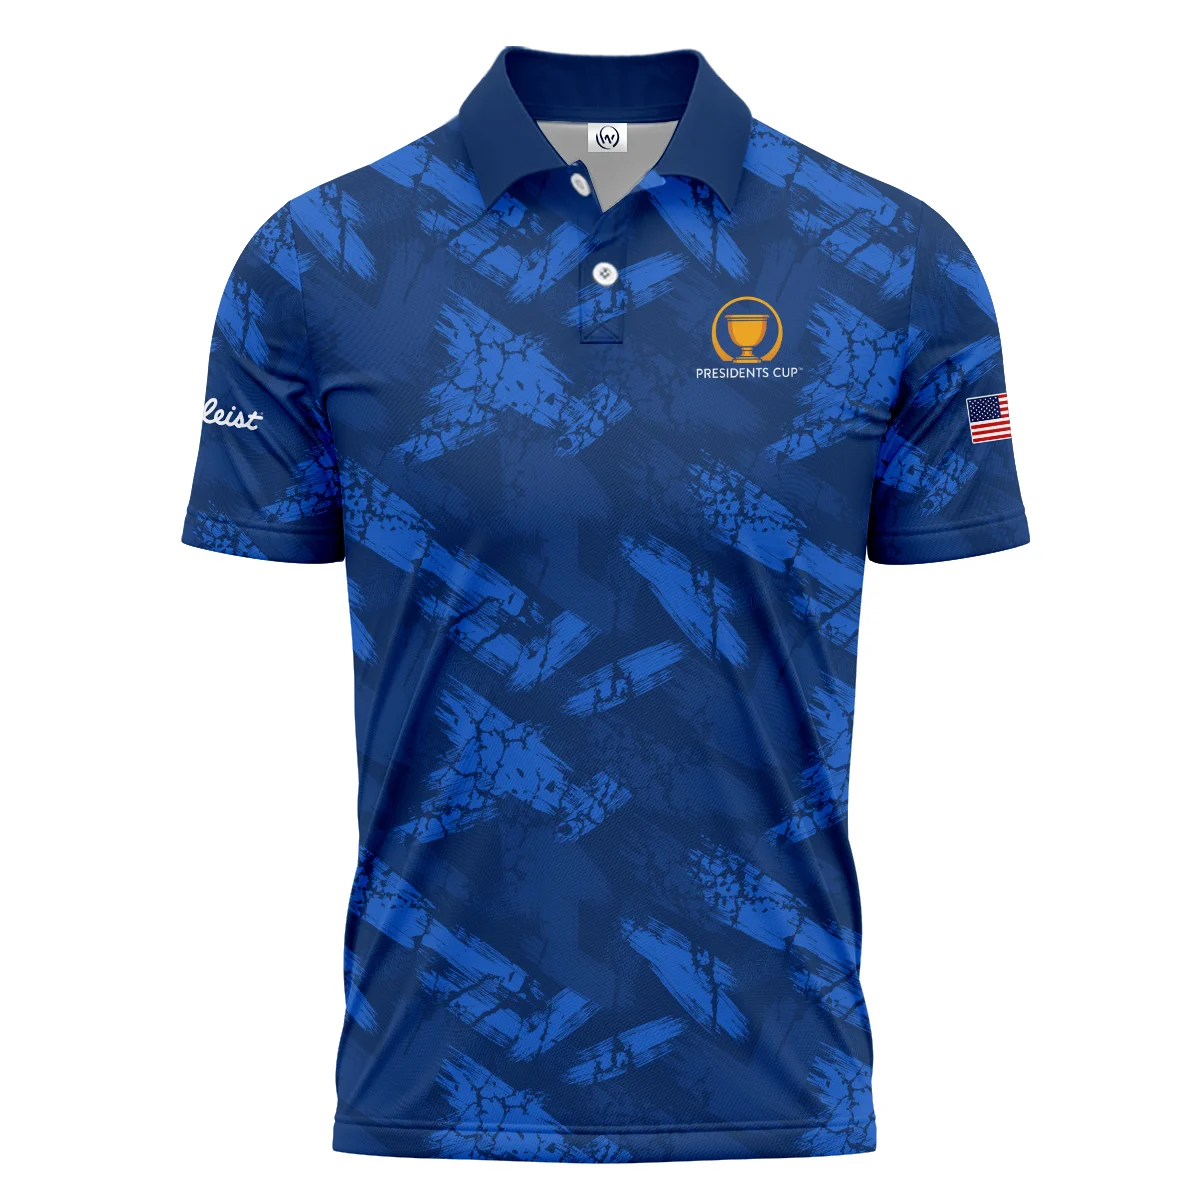 Golf Dark Blue With Grunge Pattern Presidents Cup Titleist Quarter-Zip Jacket All Over Prints HOPDC210624A01TLSWZ